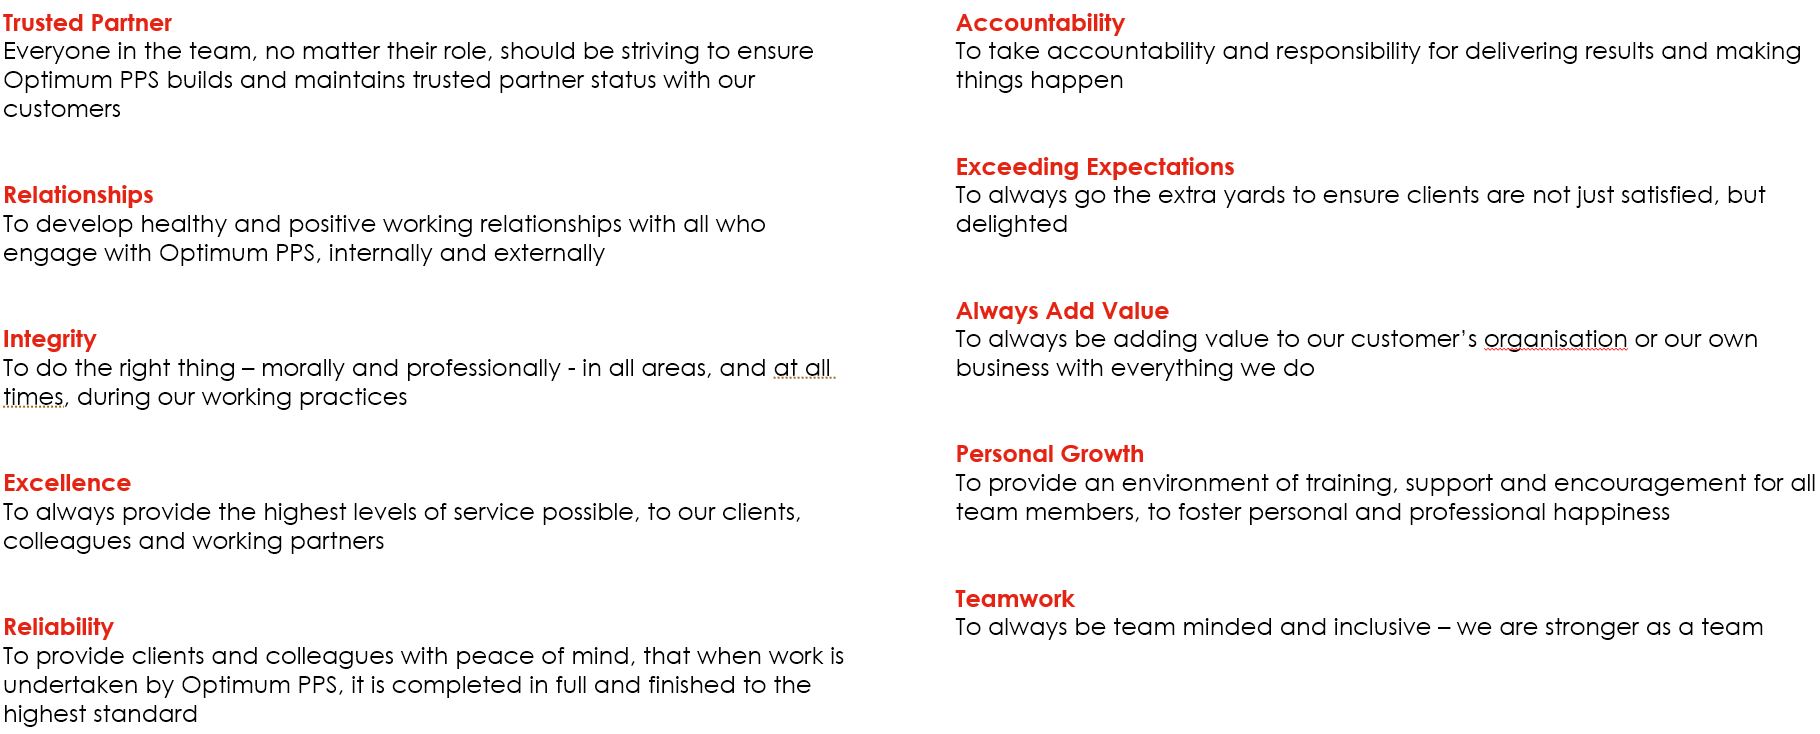 An image displaying the company values of Optimum PPS which are: Trusted Partner - Everyone in the team, no matter their role, should be striving to ensure Optimum PPS builds and maintains trusted partner status with our customers. Relationships - To develop healthy and positive working relationships with all who engage with Optimum PPS, internally and externally. Integrity - To do the right thing – morally and professionally - in all areas, and at all times, during our working practices. Excellence - To always provide the highest levels of service possible, to our clients, colleagues and working partners. Reliability - To provide clients and colleagues with peace of mind, that when work is undertaken by Optimum PPS, it is completed in full and finished to the highest standard. Accountability - To take accountability and responsibility for delivering results and making things happen. Exceeding Expectations =To always go the extra yards to ensure clients are not just satisfied, but delighted.
Always Add Value -To always be adding value to our customer’s organisation or our own business with everything we do. Personal Growth - To provide an environment of training, support and encouragement for all team members, to foster personal and professional happiness.
Teamwork - To always be team minded and inclusive – we are stronger as a team.